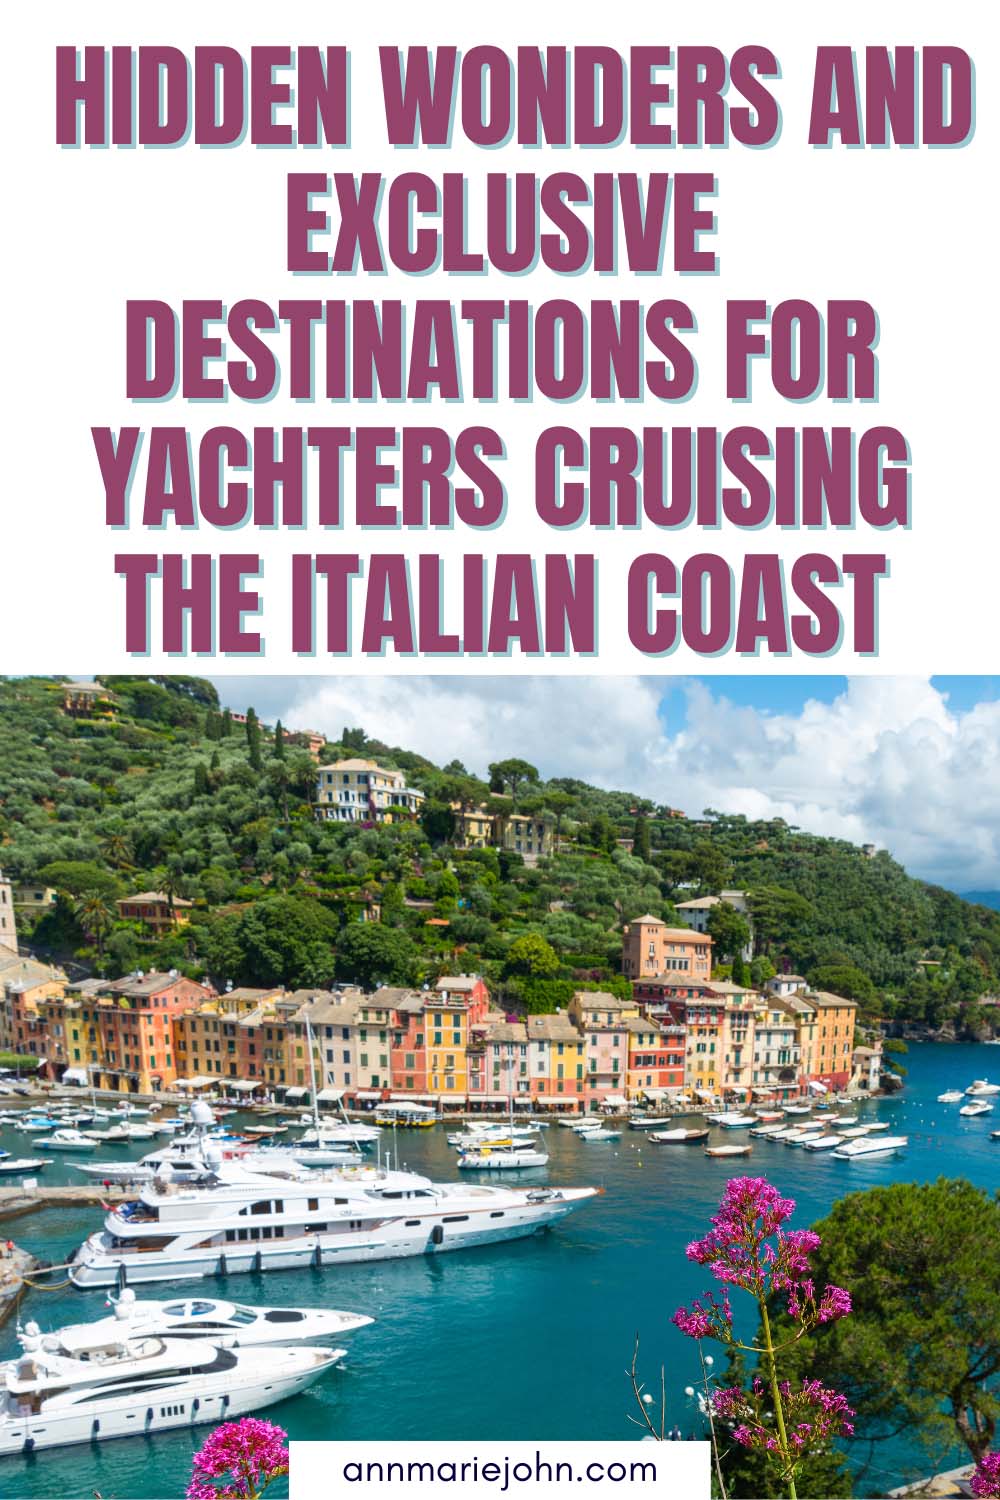 Hidden Wonders and Exclusive Destinations for Yachters Cruising the Italian Coast